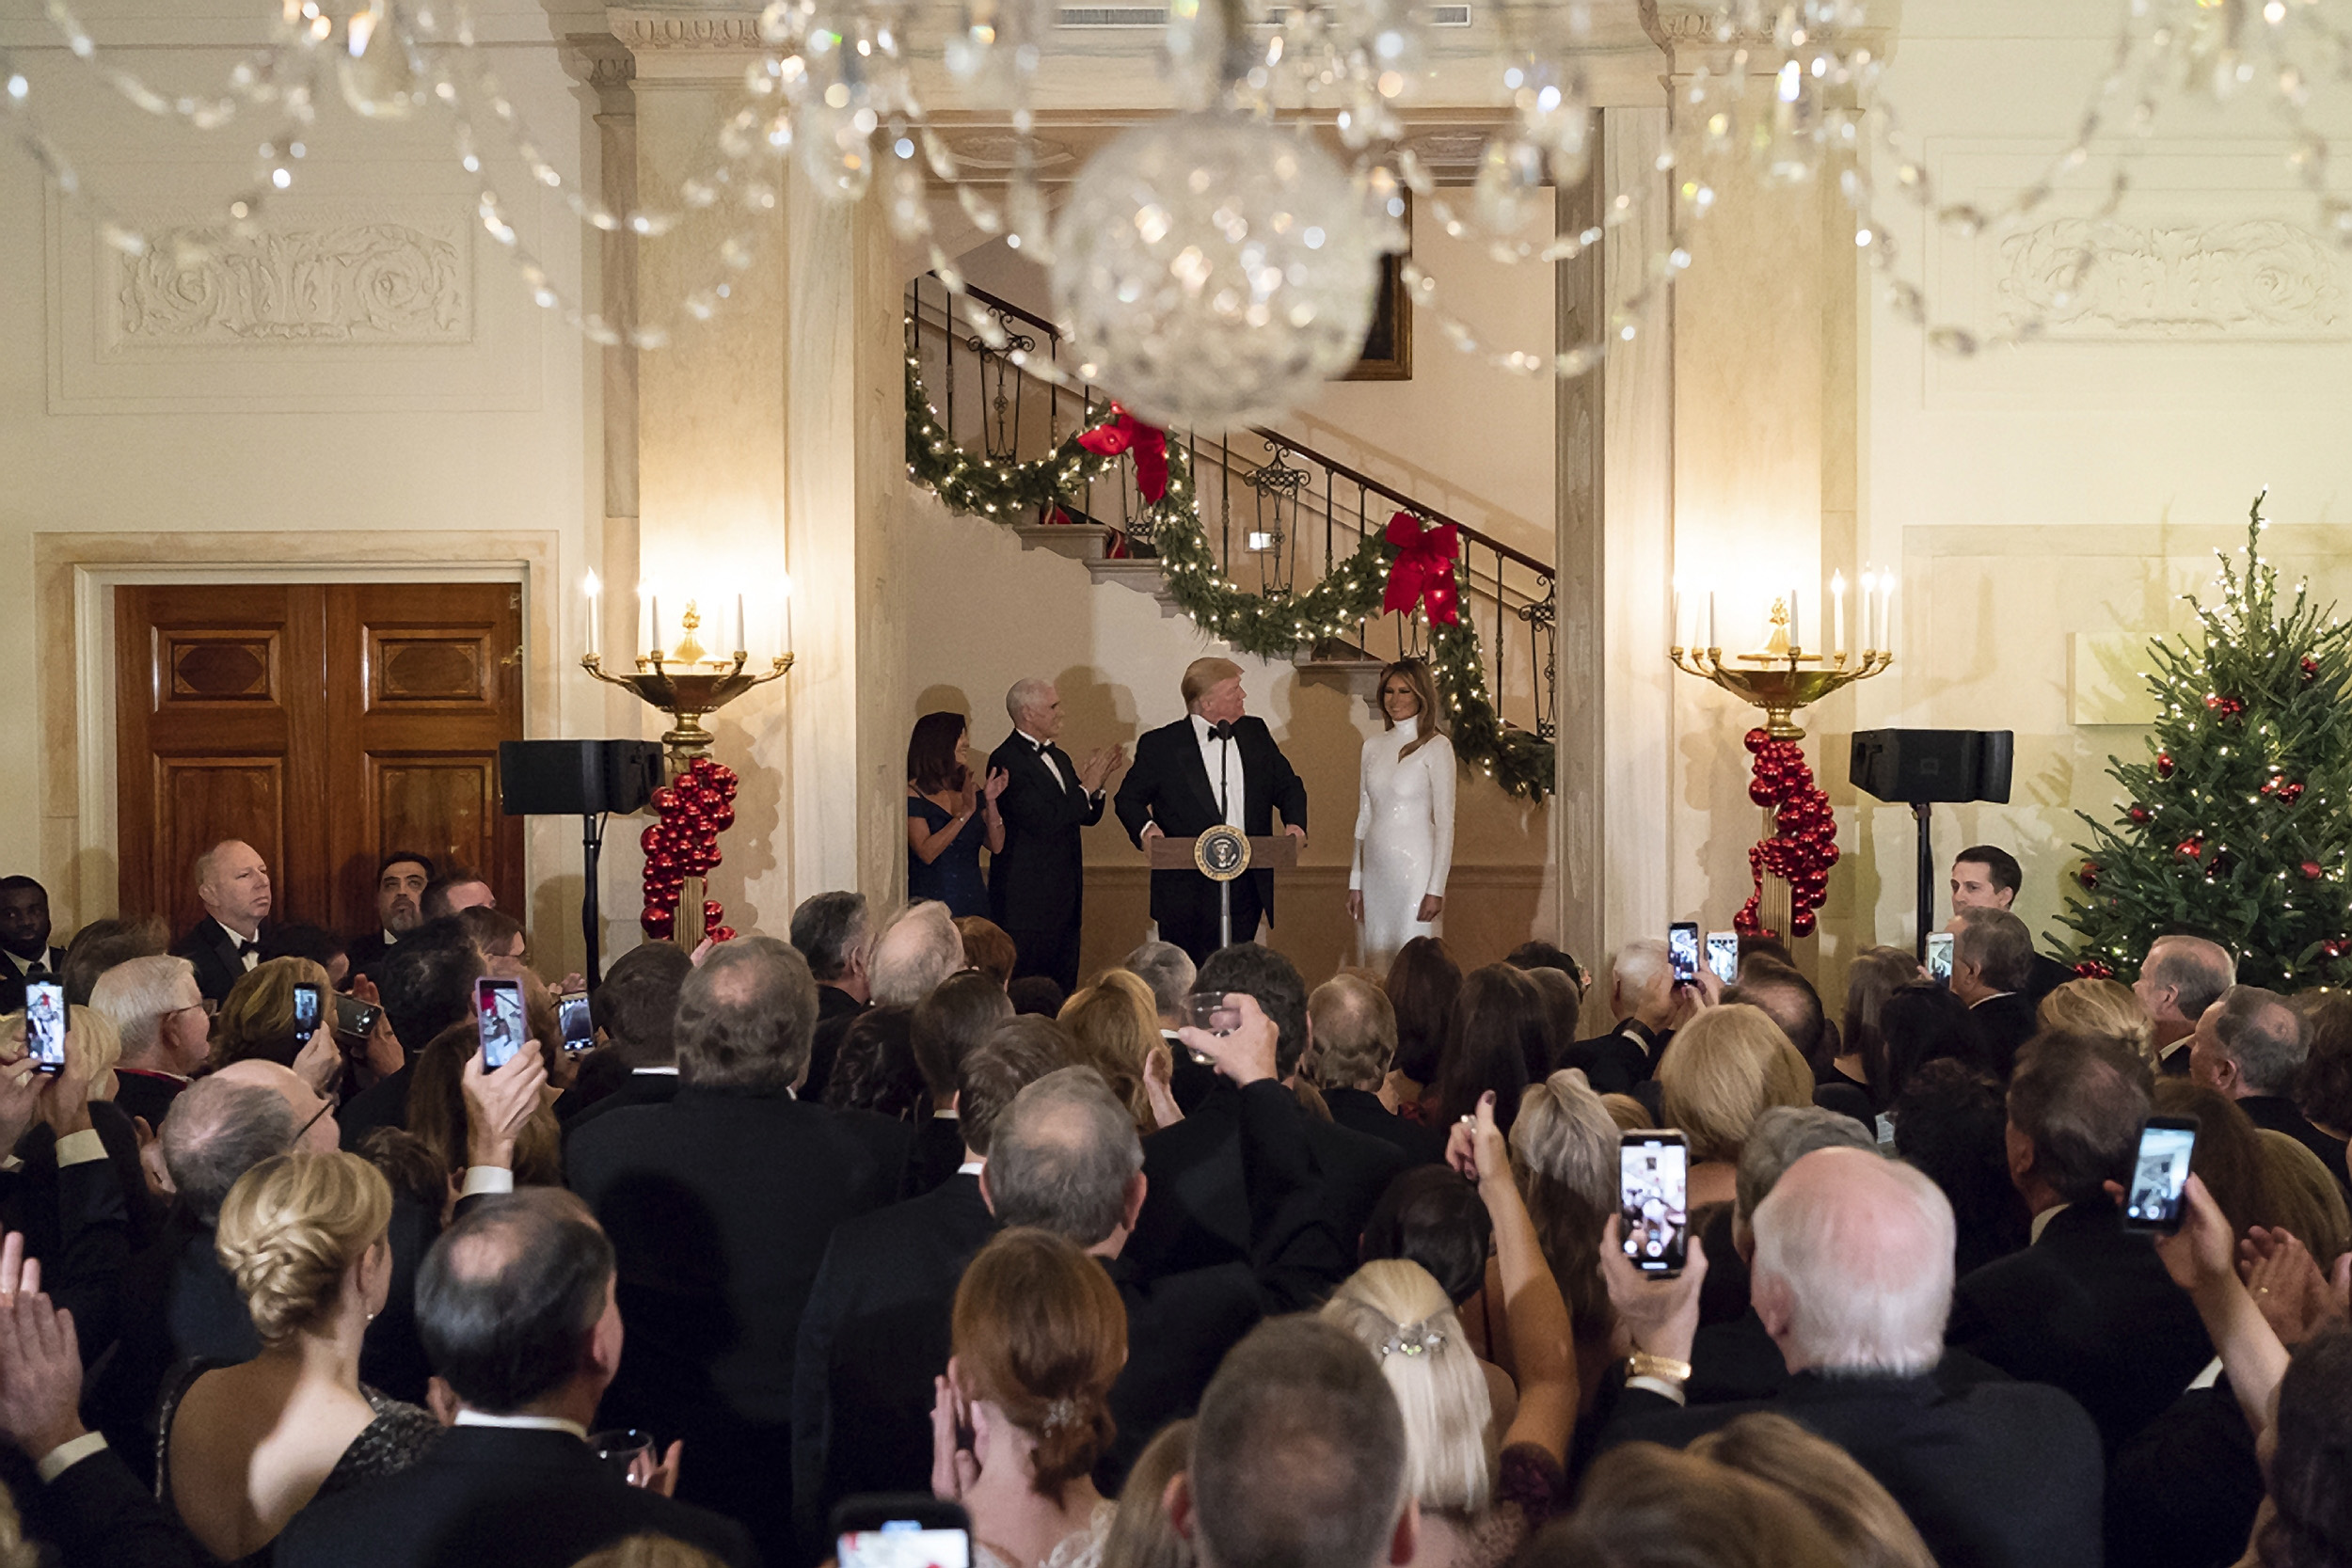 PHOTO: President Donald Trump, joined by First Lady Melania Trump, Vice President Mike Pence and Karen Pence, delivers remarks in the Grand Foyer of the White House, Dec. 15, 2018, in Washington, DC.